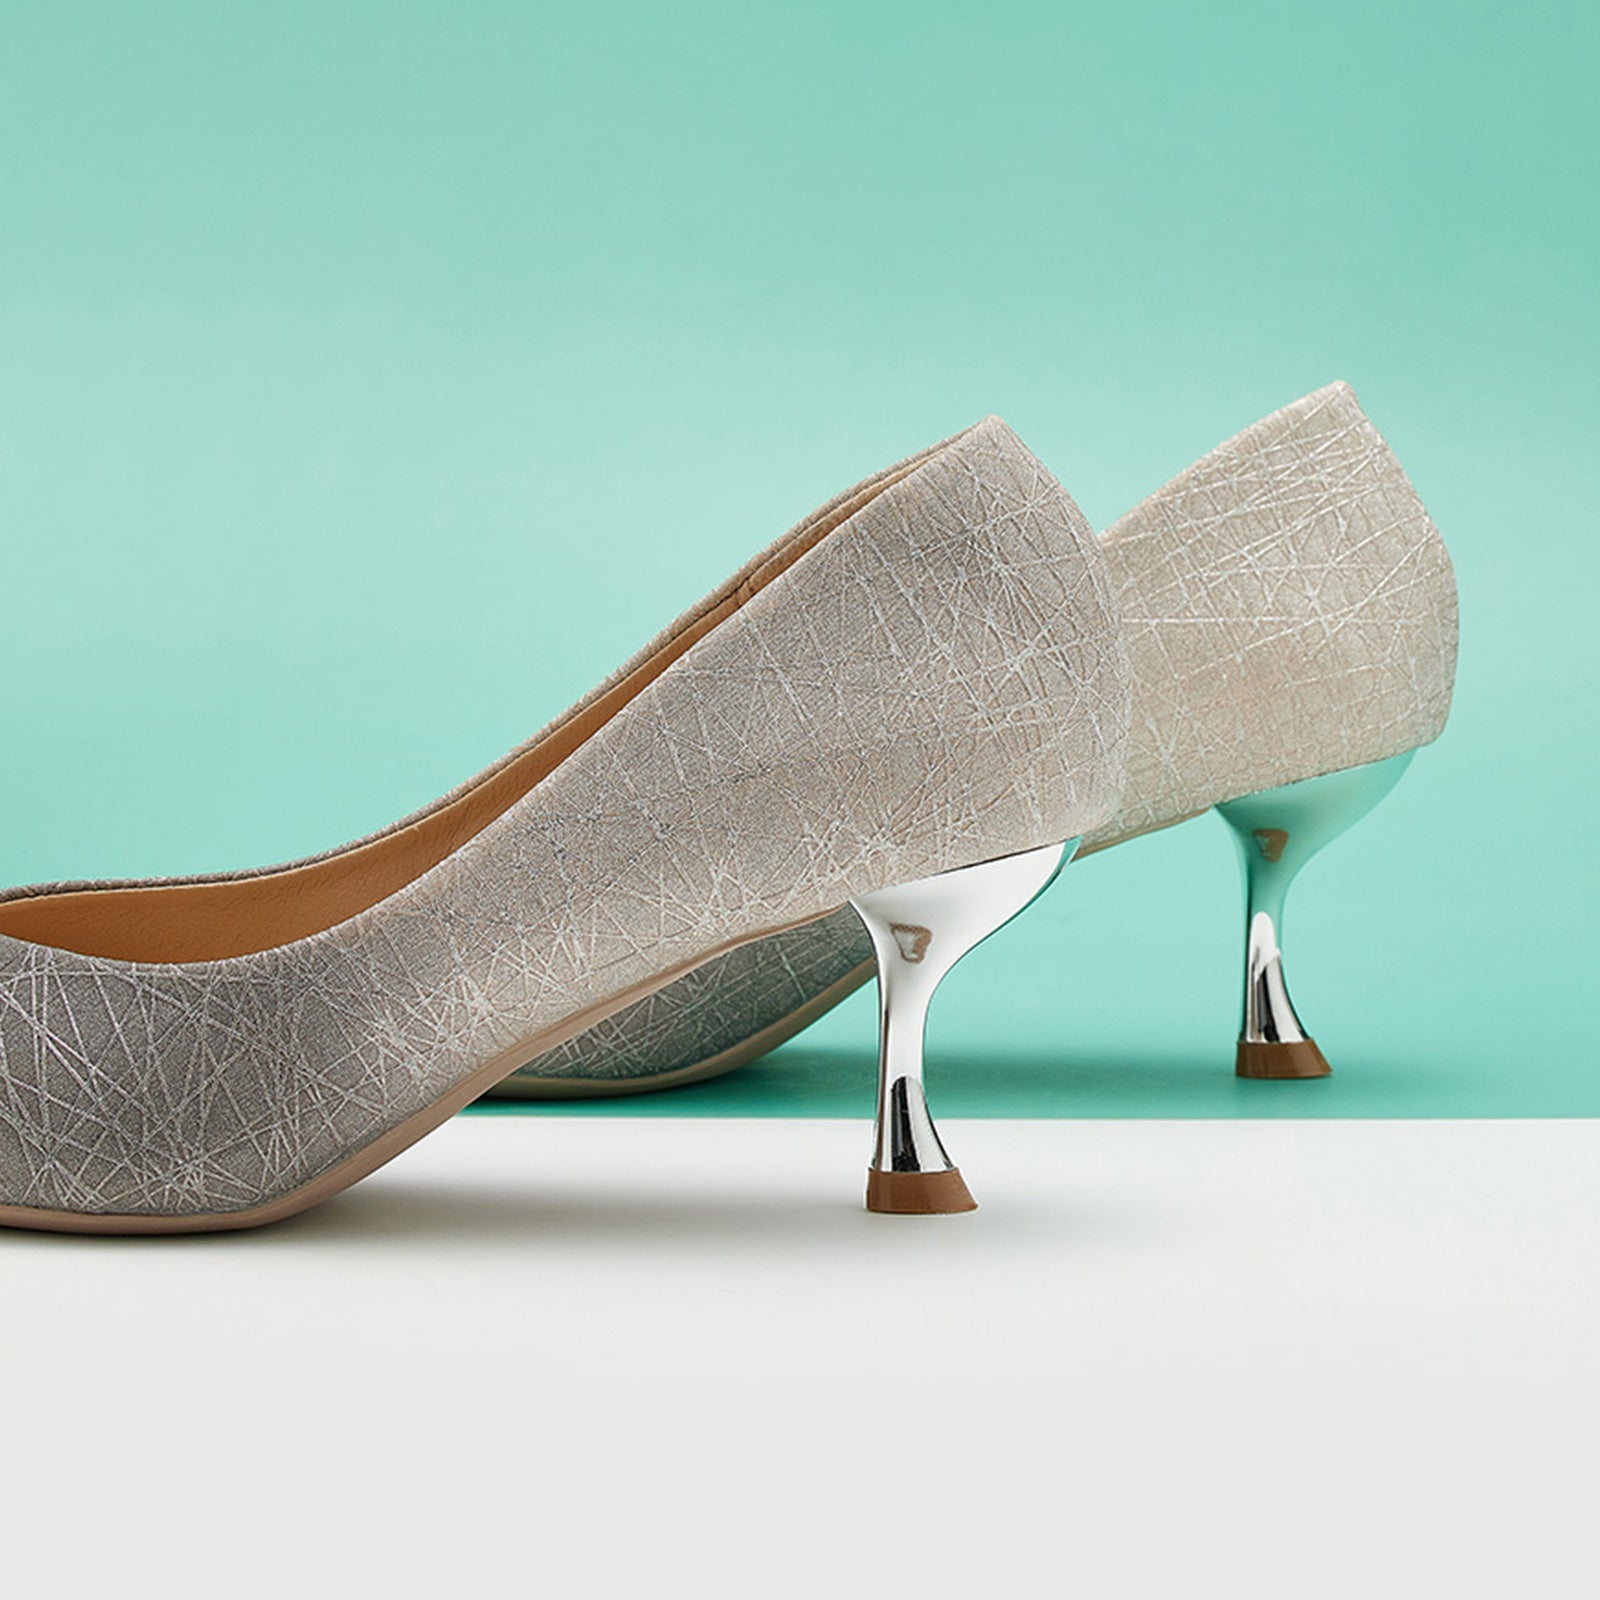 Classic Silver Glitz: Silver Glittered Pumps with Louis Heel, a dazzling choice for adding a touch of glamour to any outfit